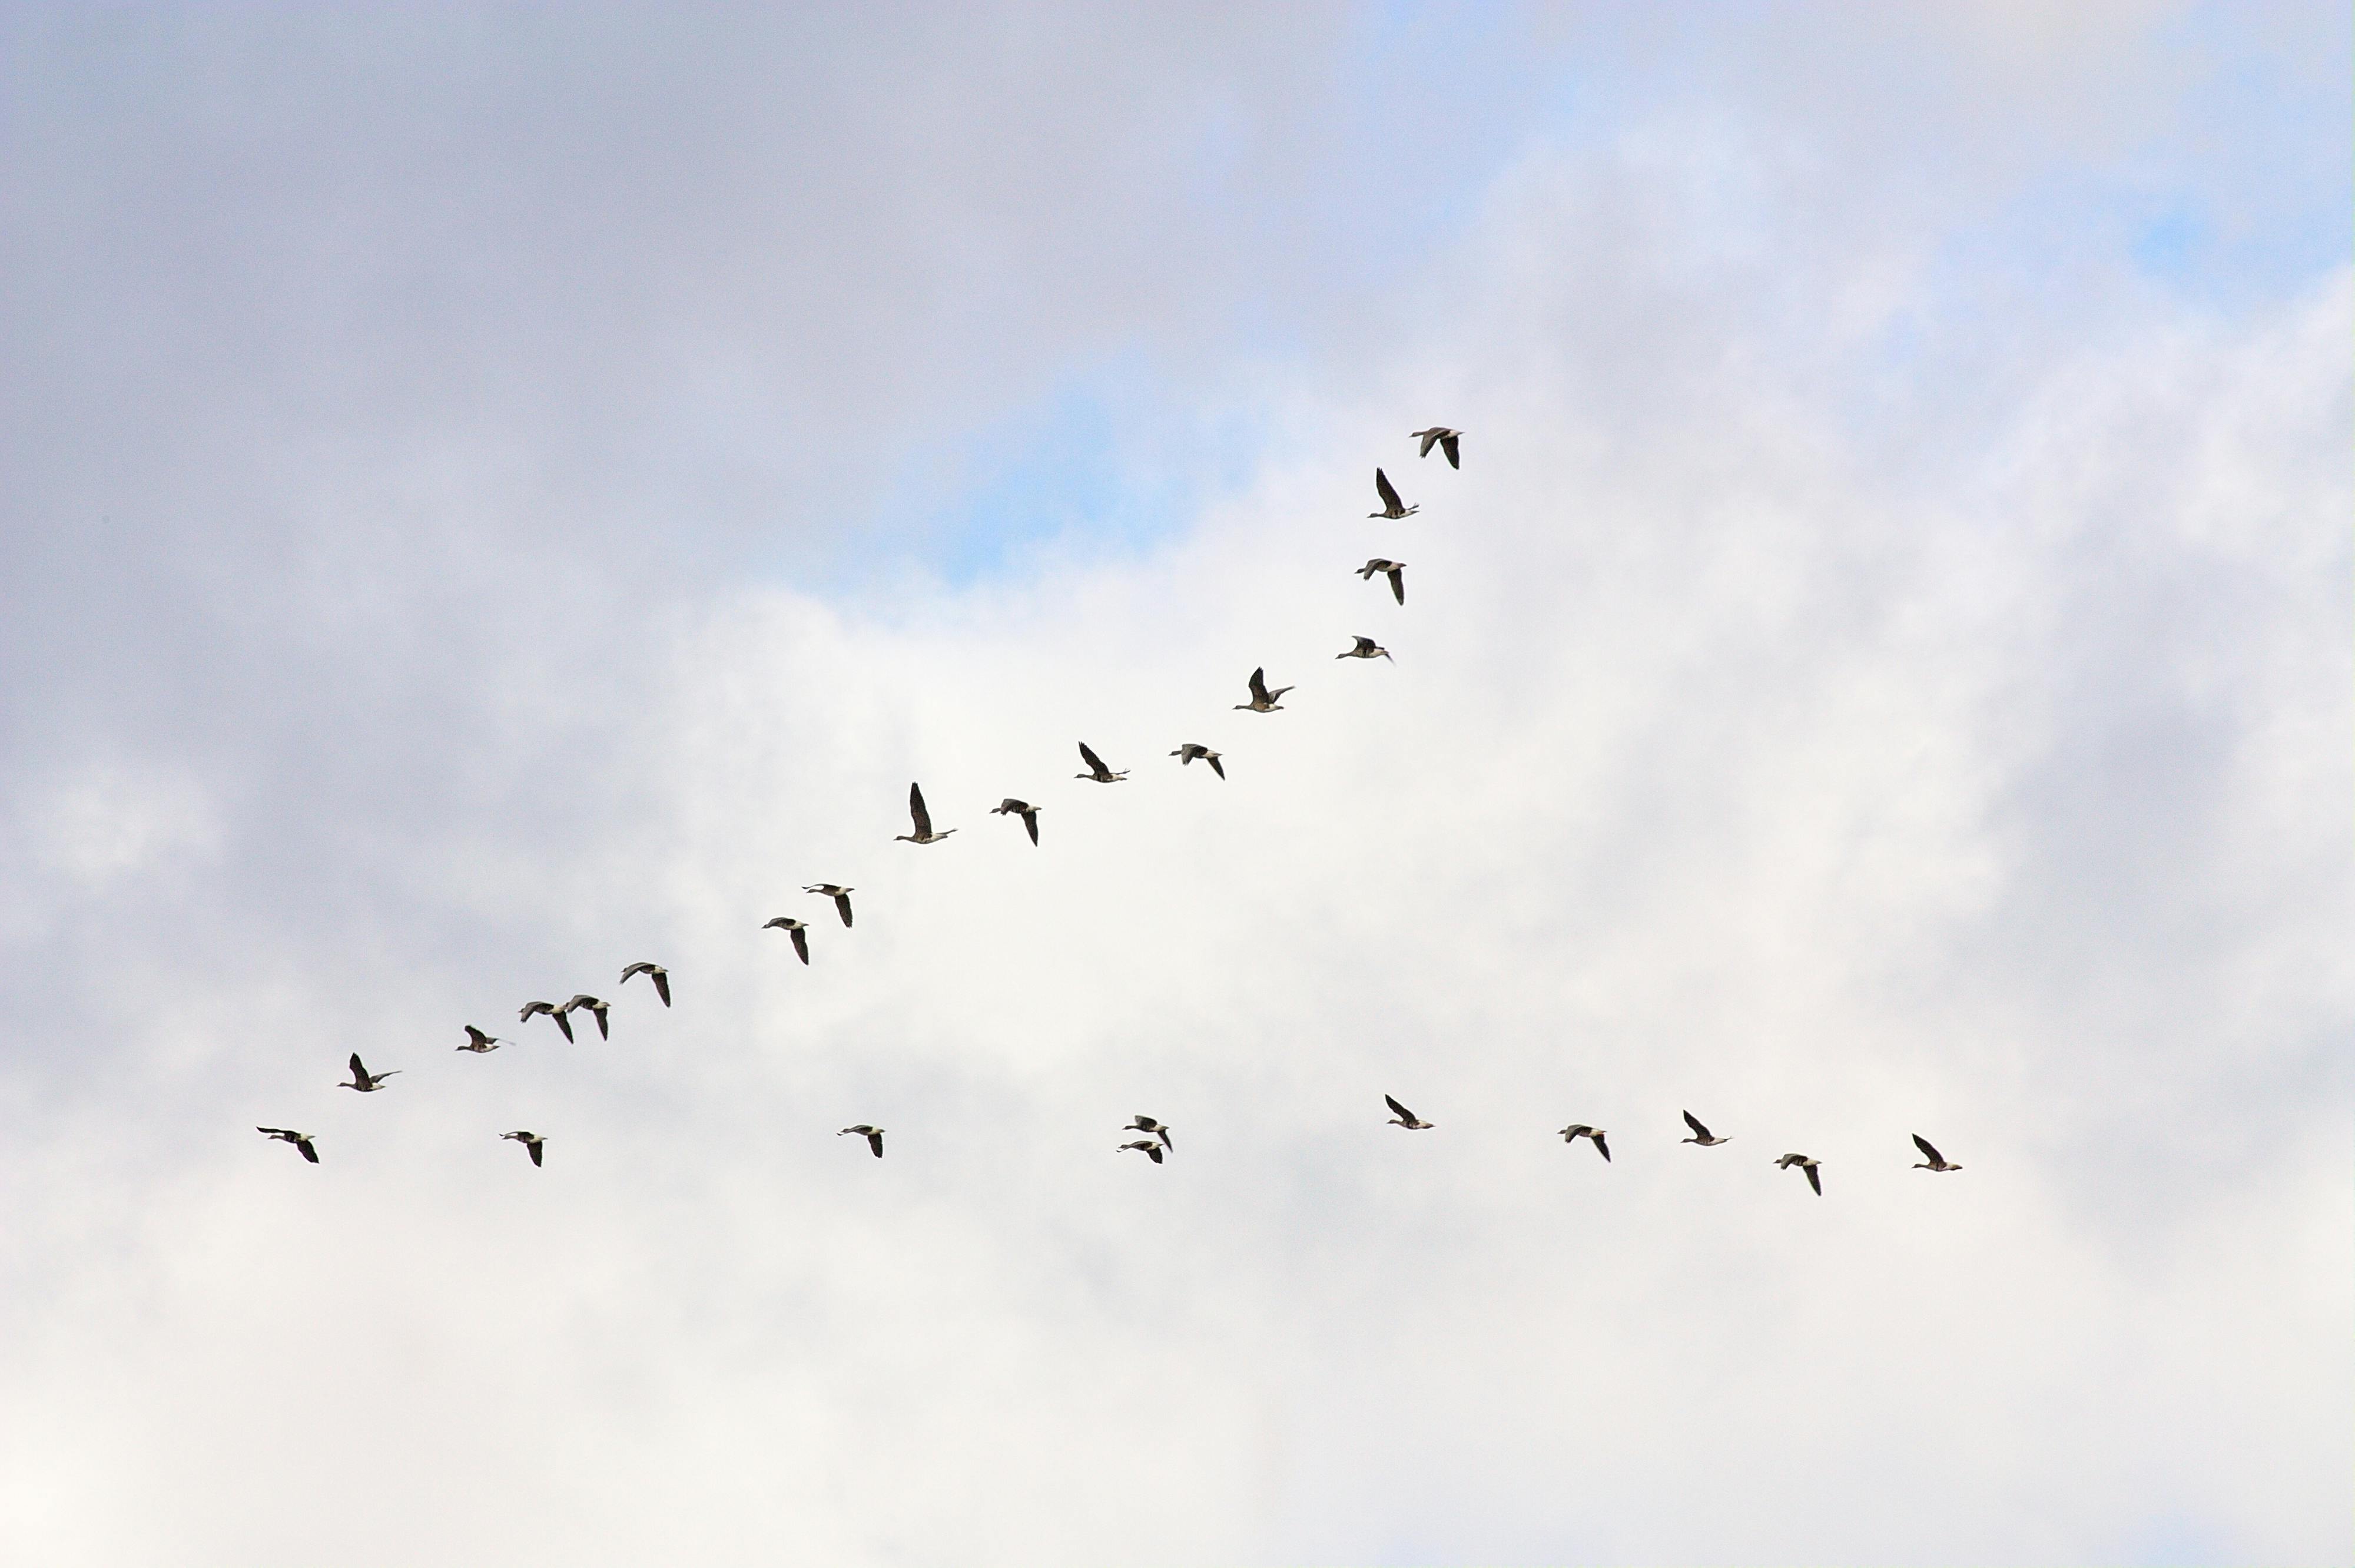 Free stock photo of birds in formation, flying geese, geese